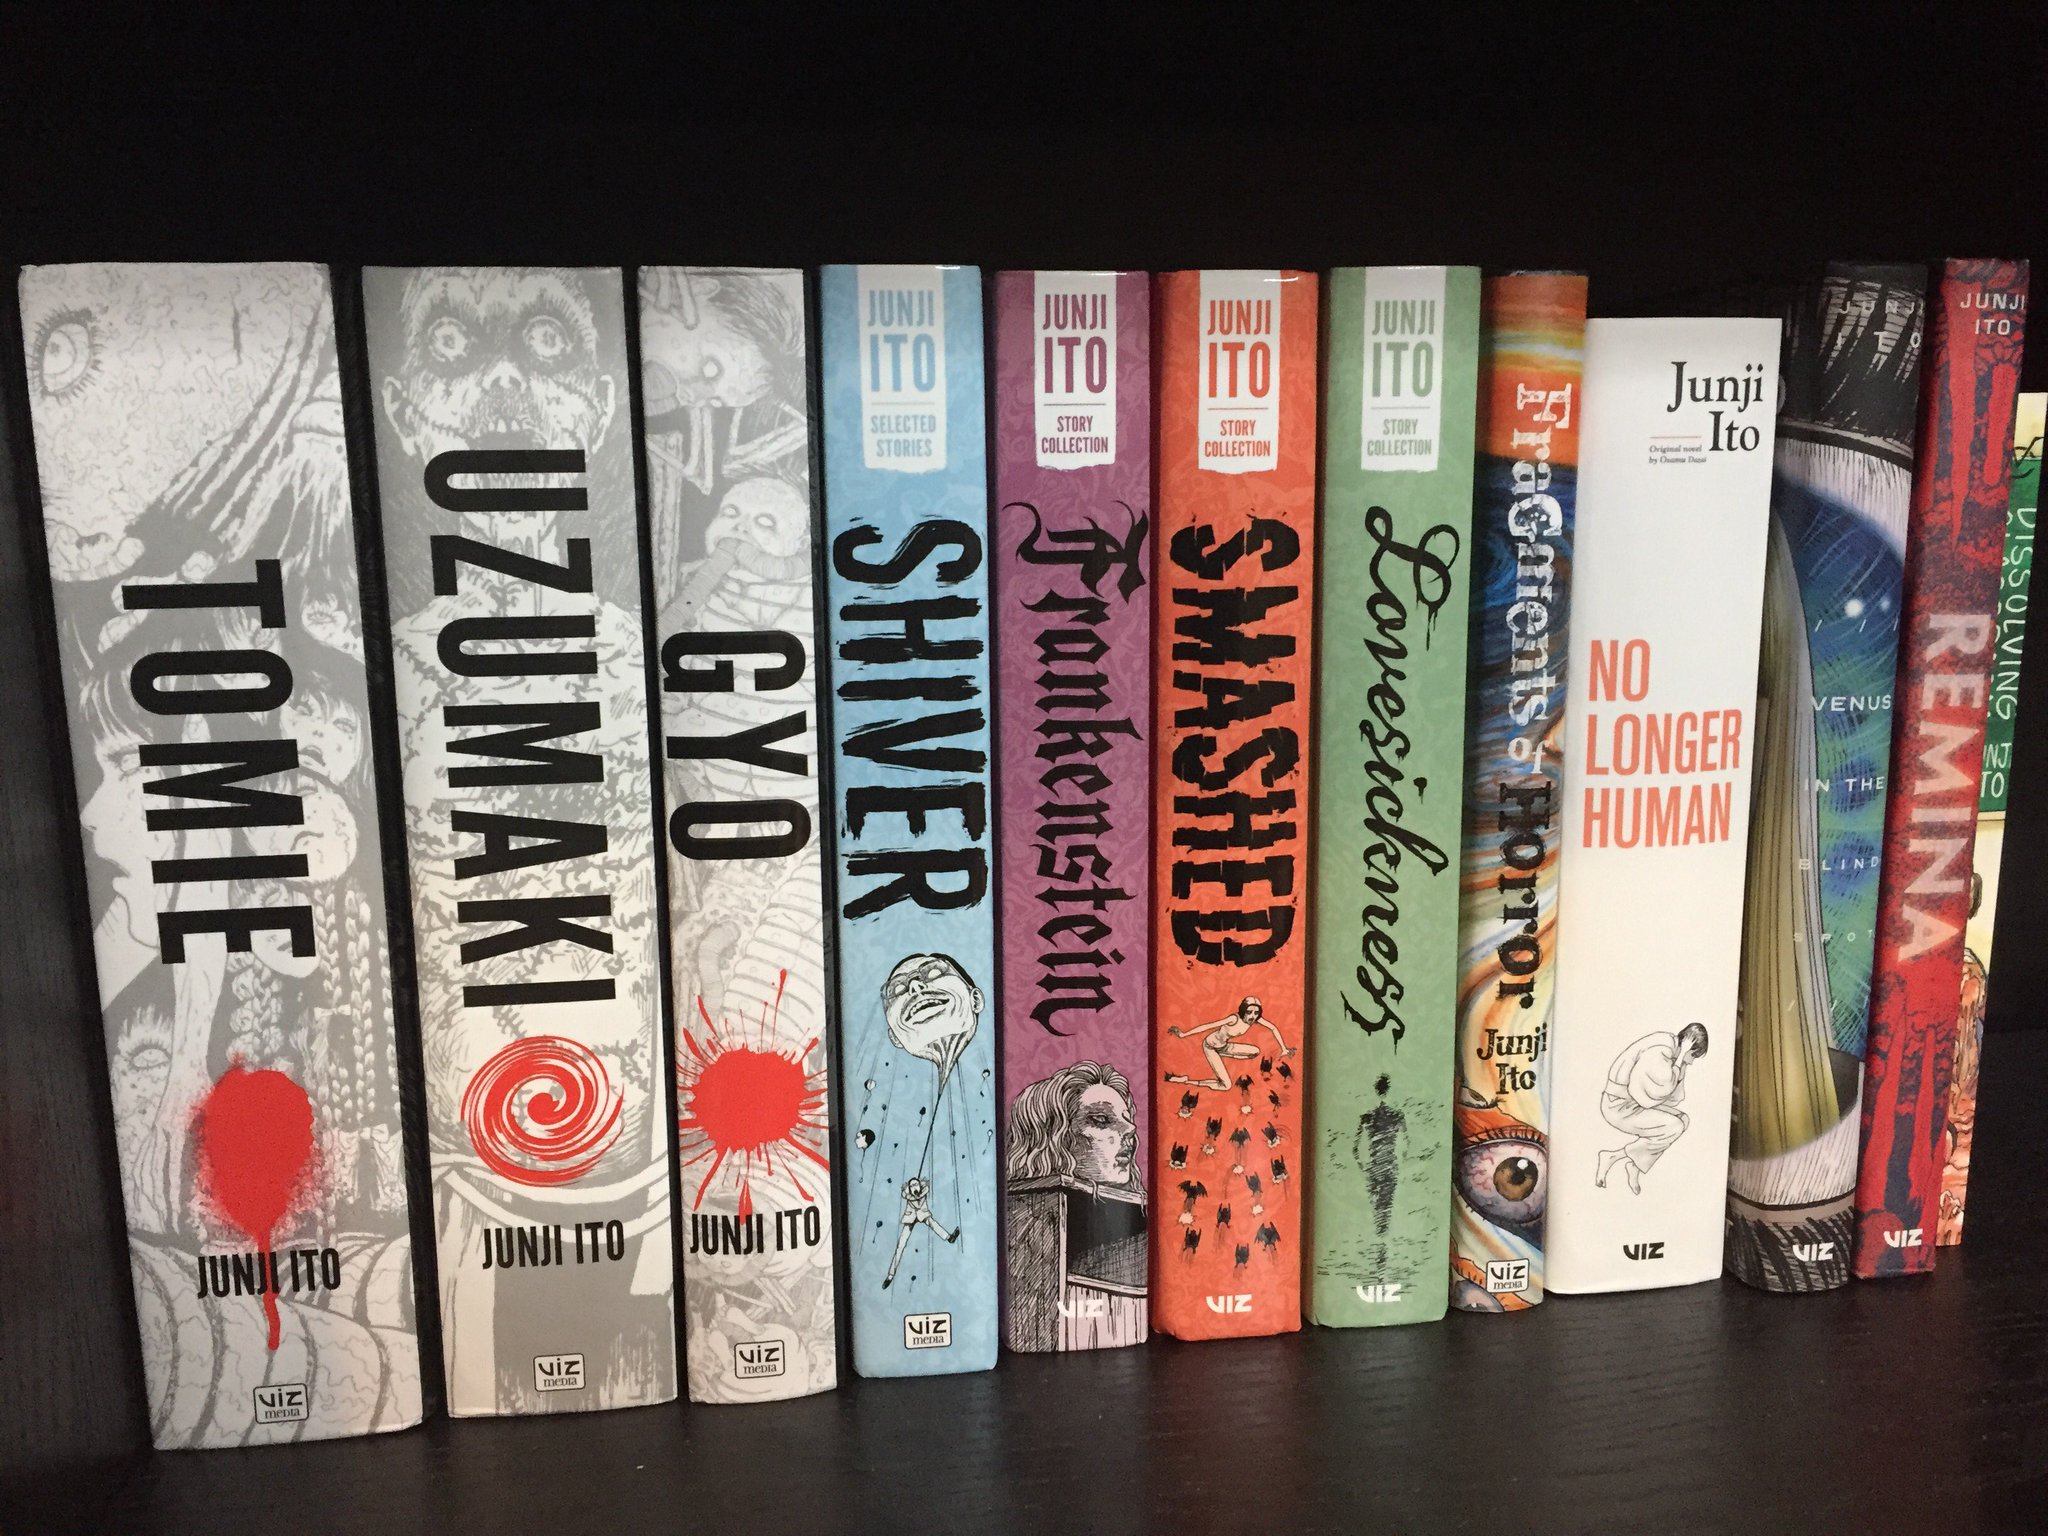 My junji ito collection for now,only lacking a few books from what